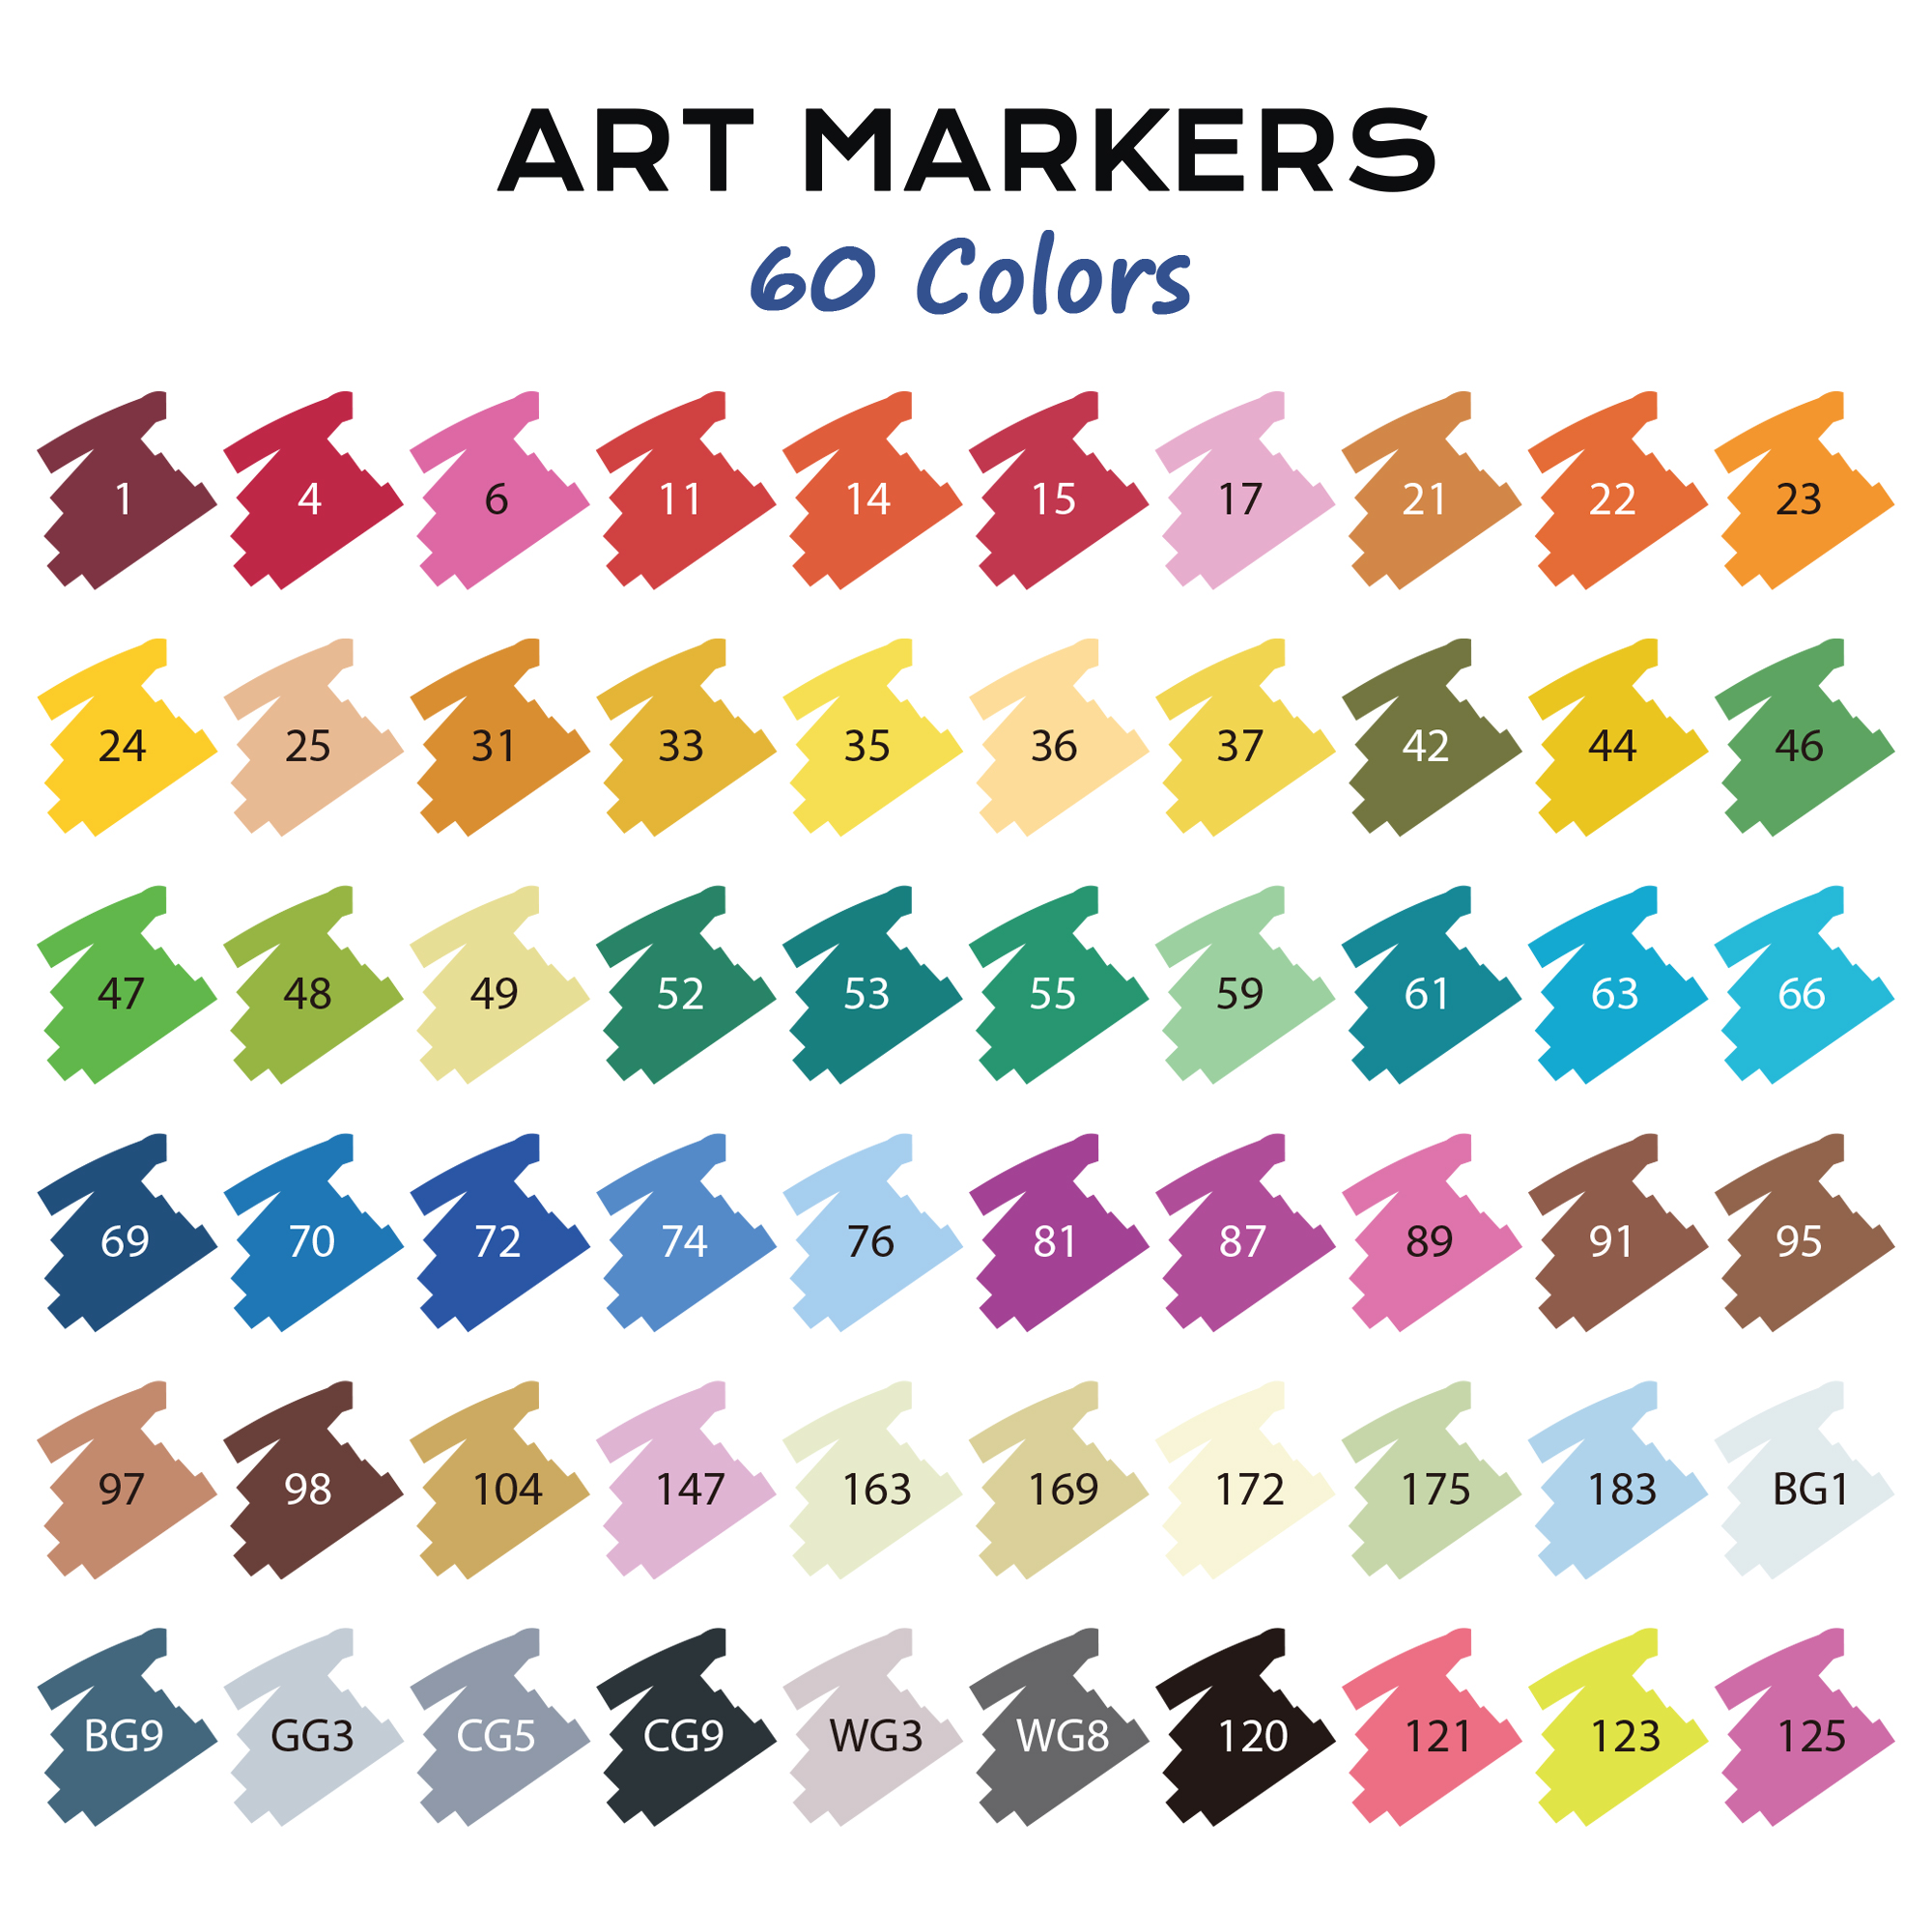 Deli 60 Colors Dual Tip Alcohol Markers, Art Markers Set Art Supplies Permanent Marker with Storage Box - image 2 of 7